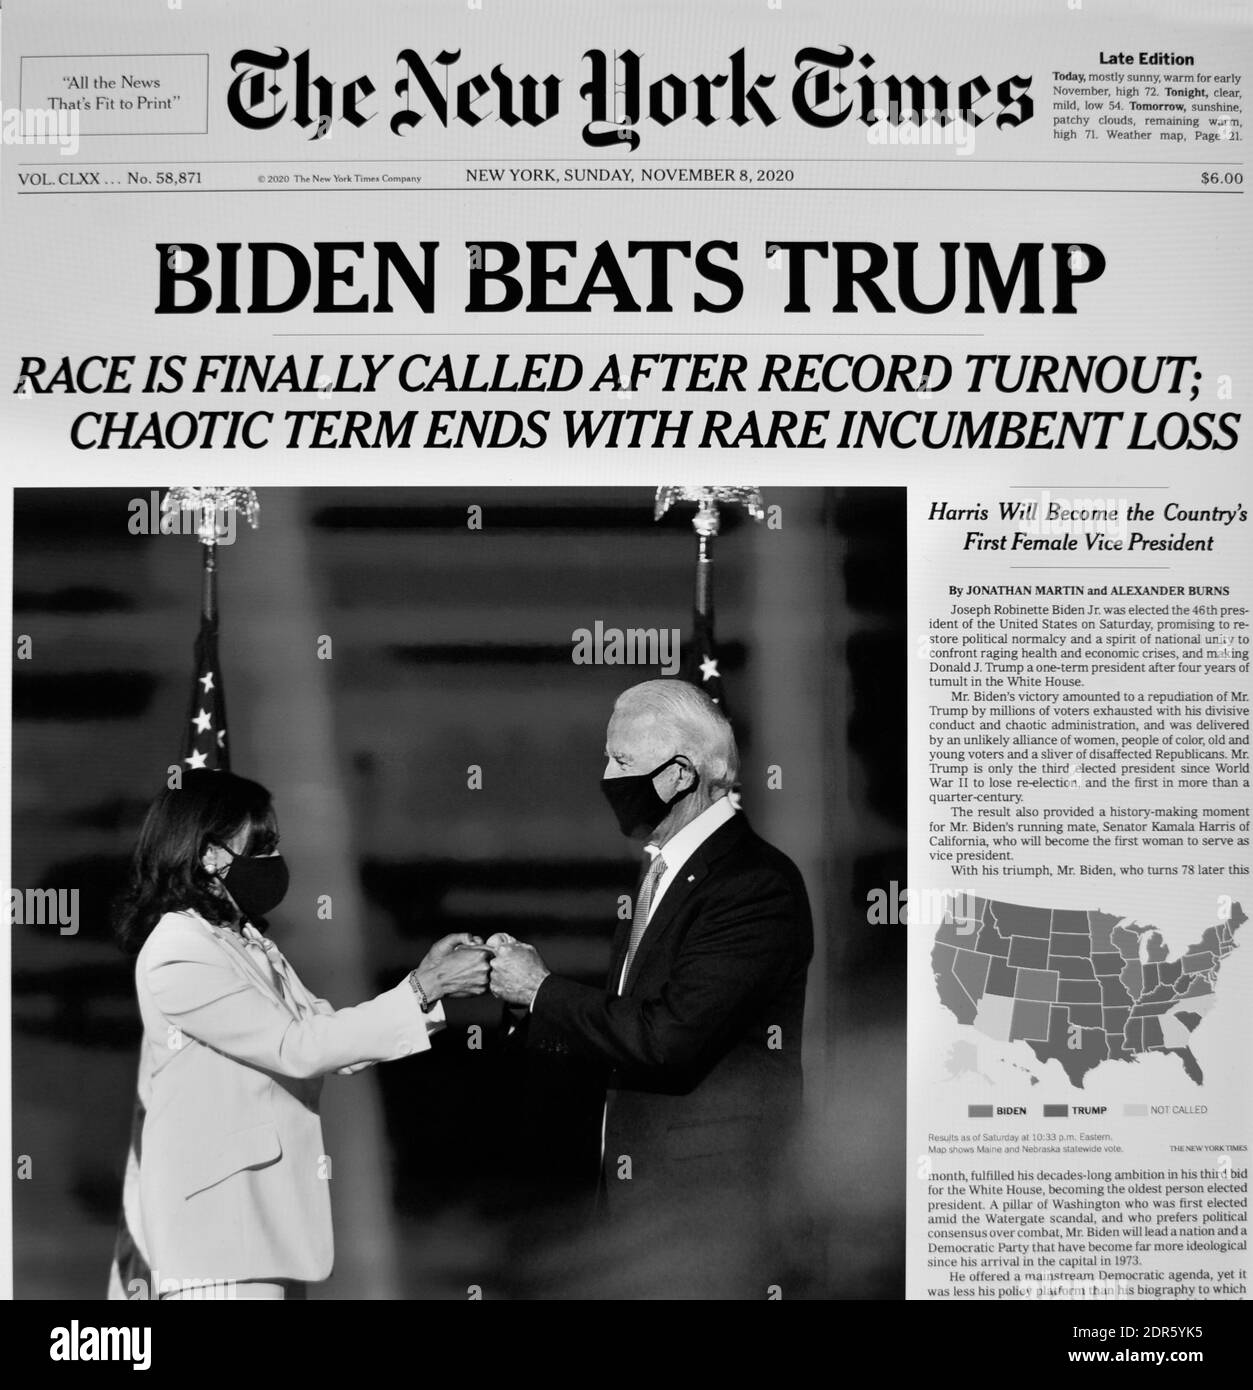 The front page of The New York Times on Sunday, November 8, 2020, with a headline declaring Joe Biden beat Donald Trump in the Presidental election. Stock Photo